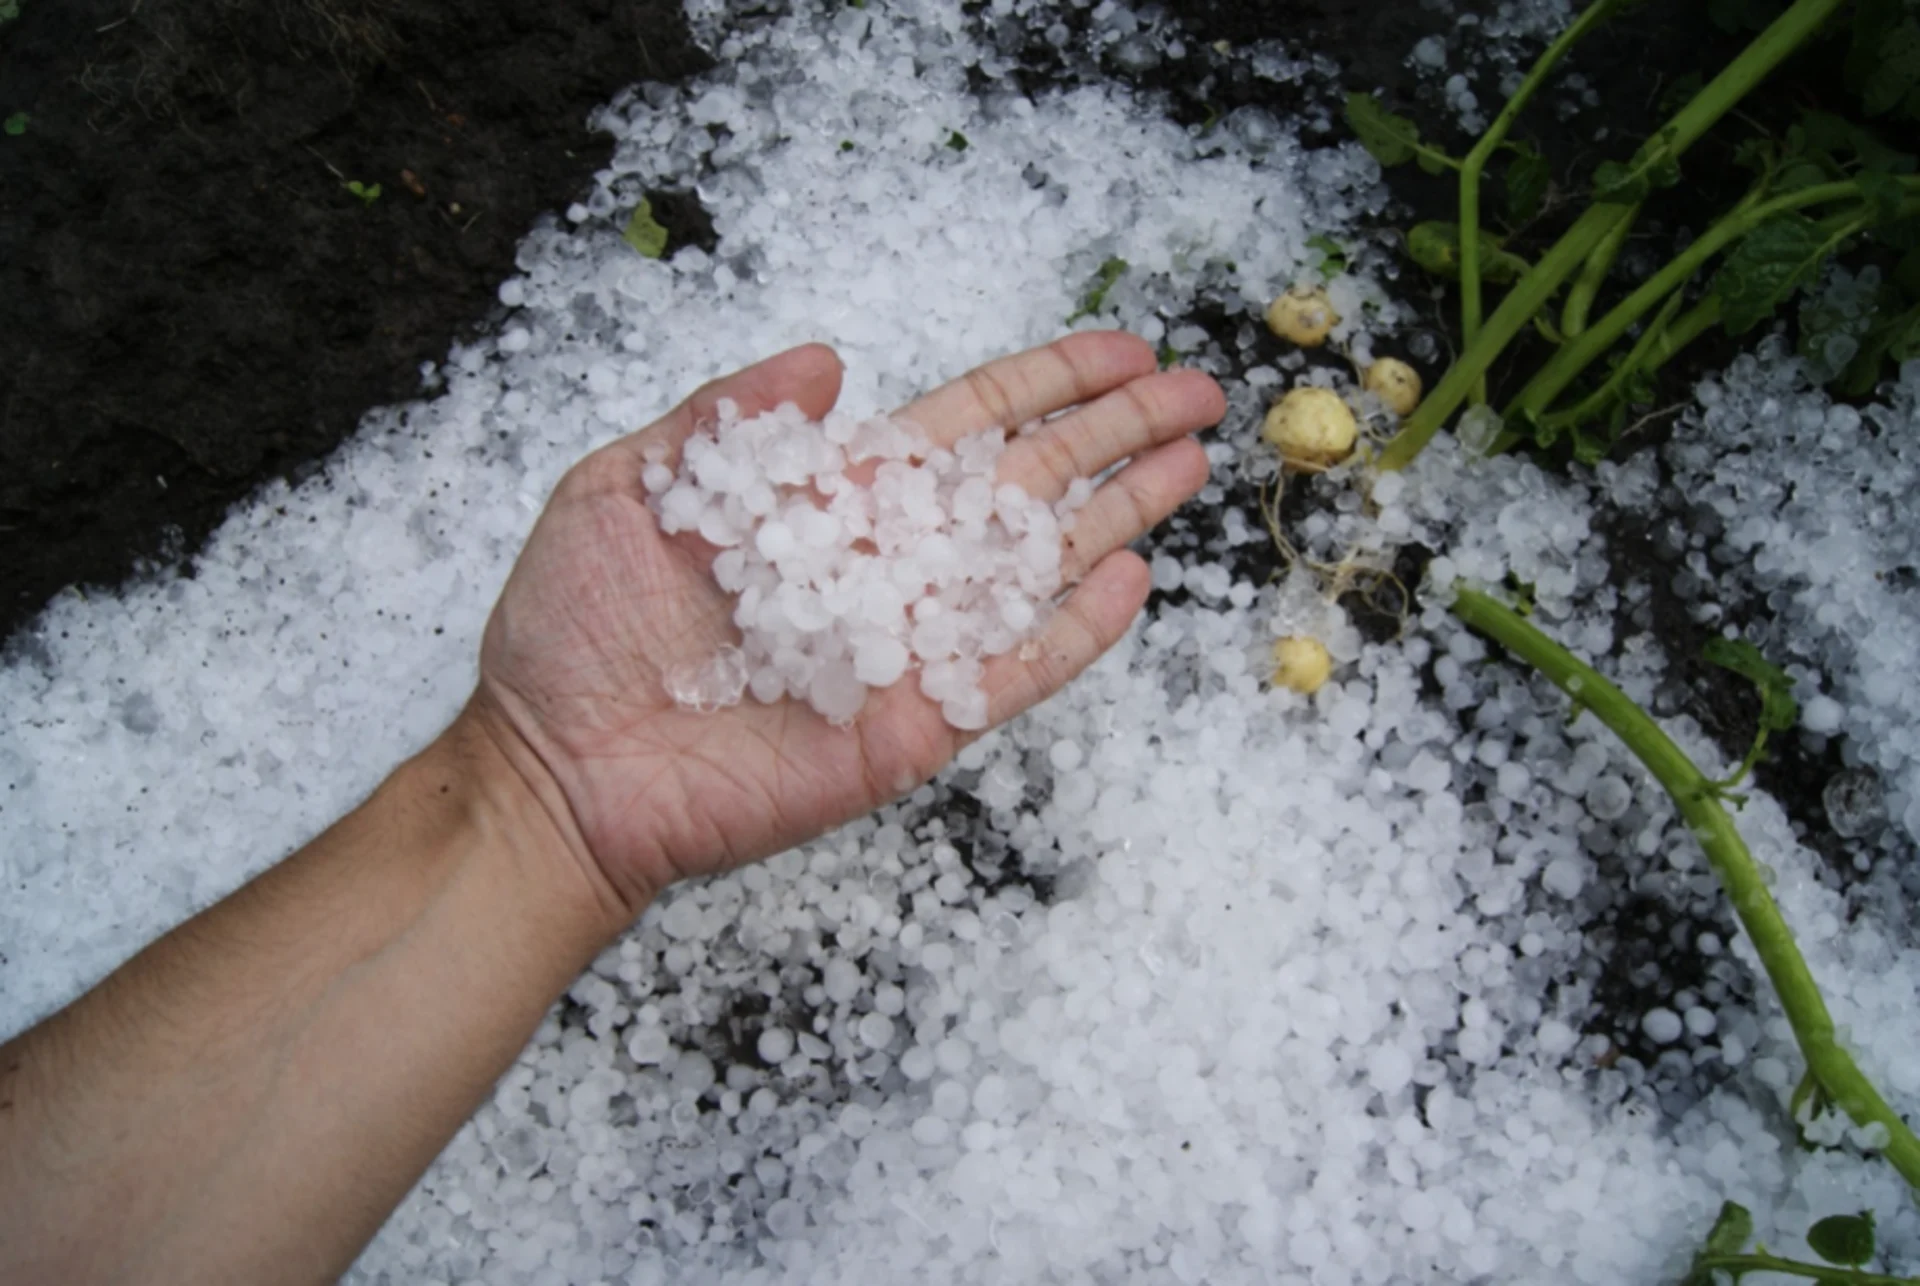 The $100 million hailstorm that hit Canada's second-largest wine-producing area